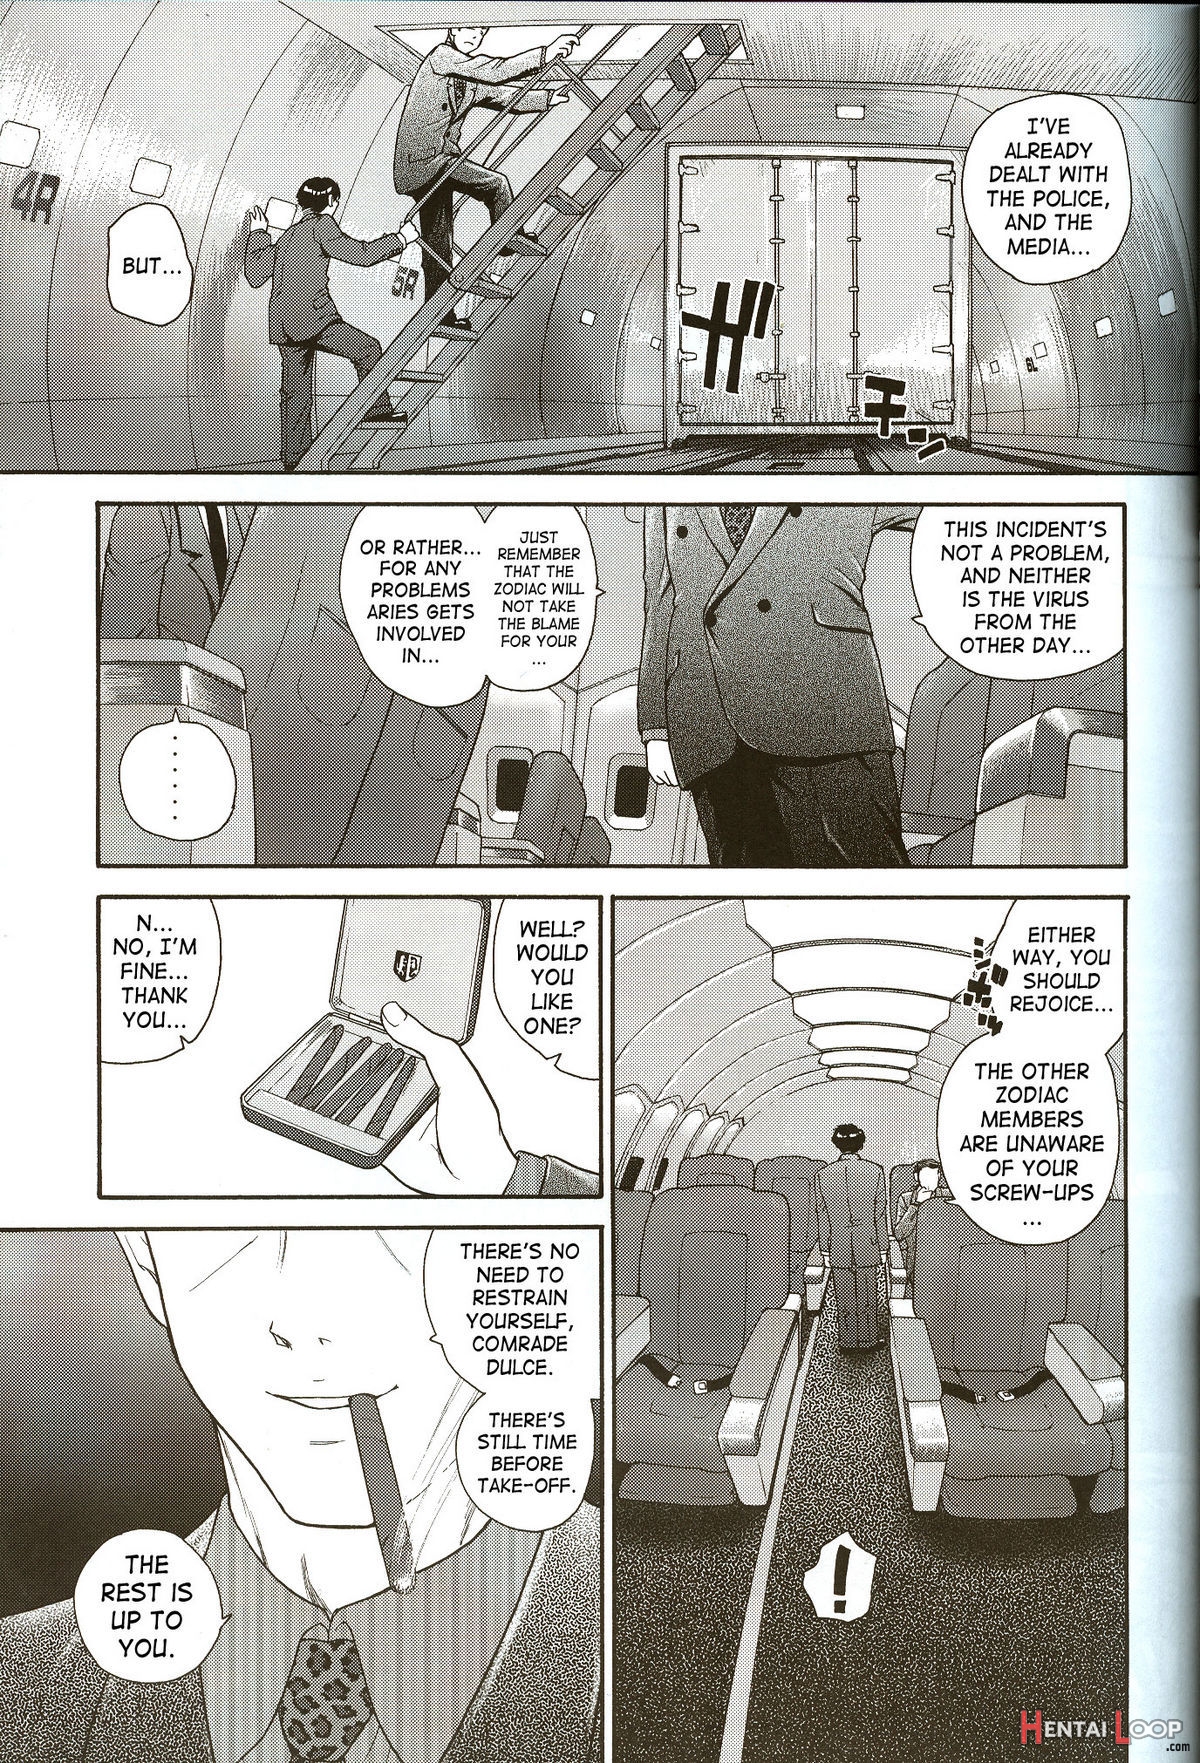 Dulce Report 8 page 6